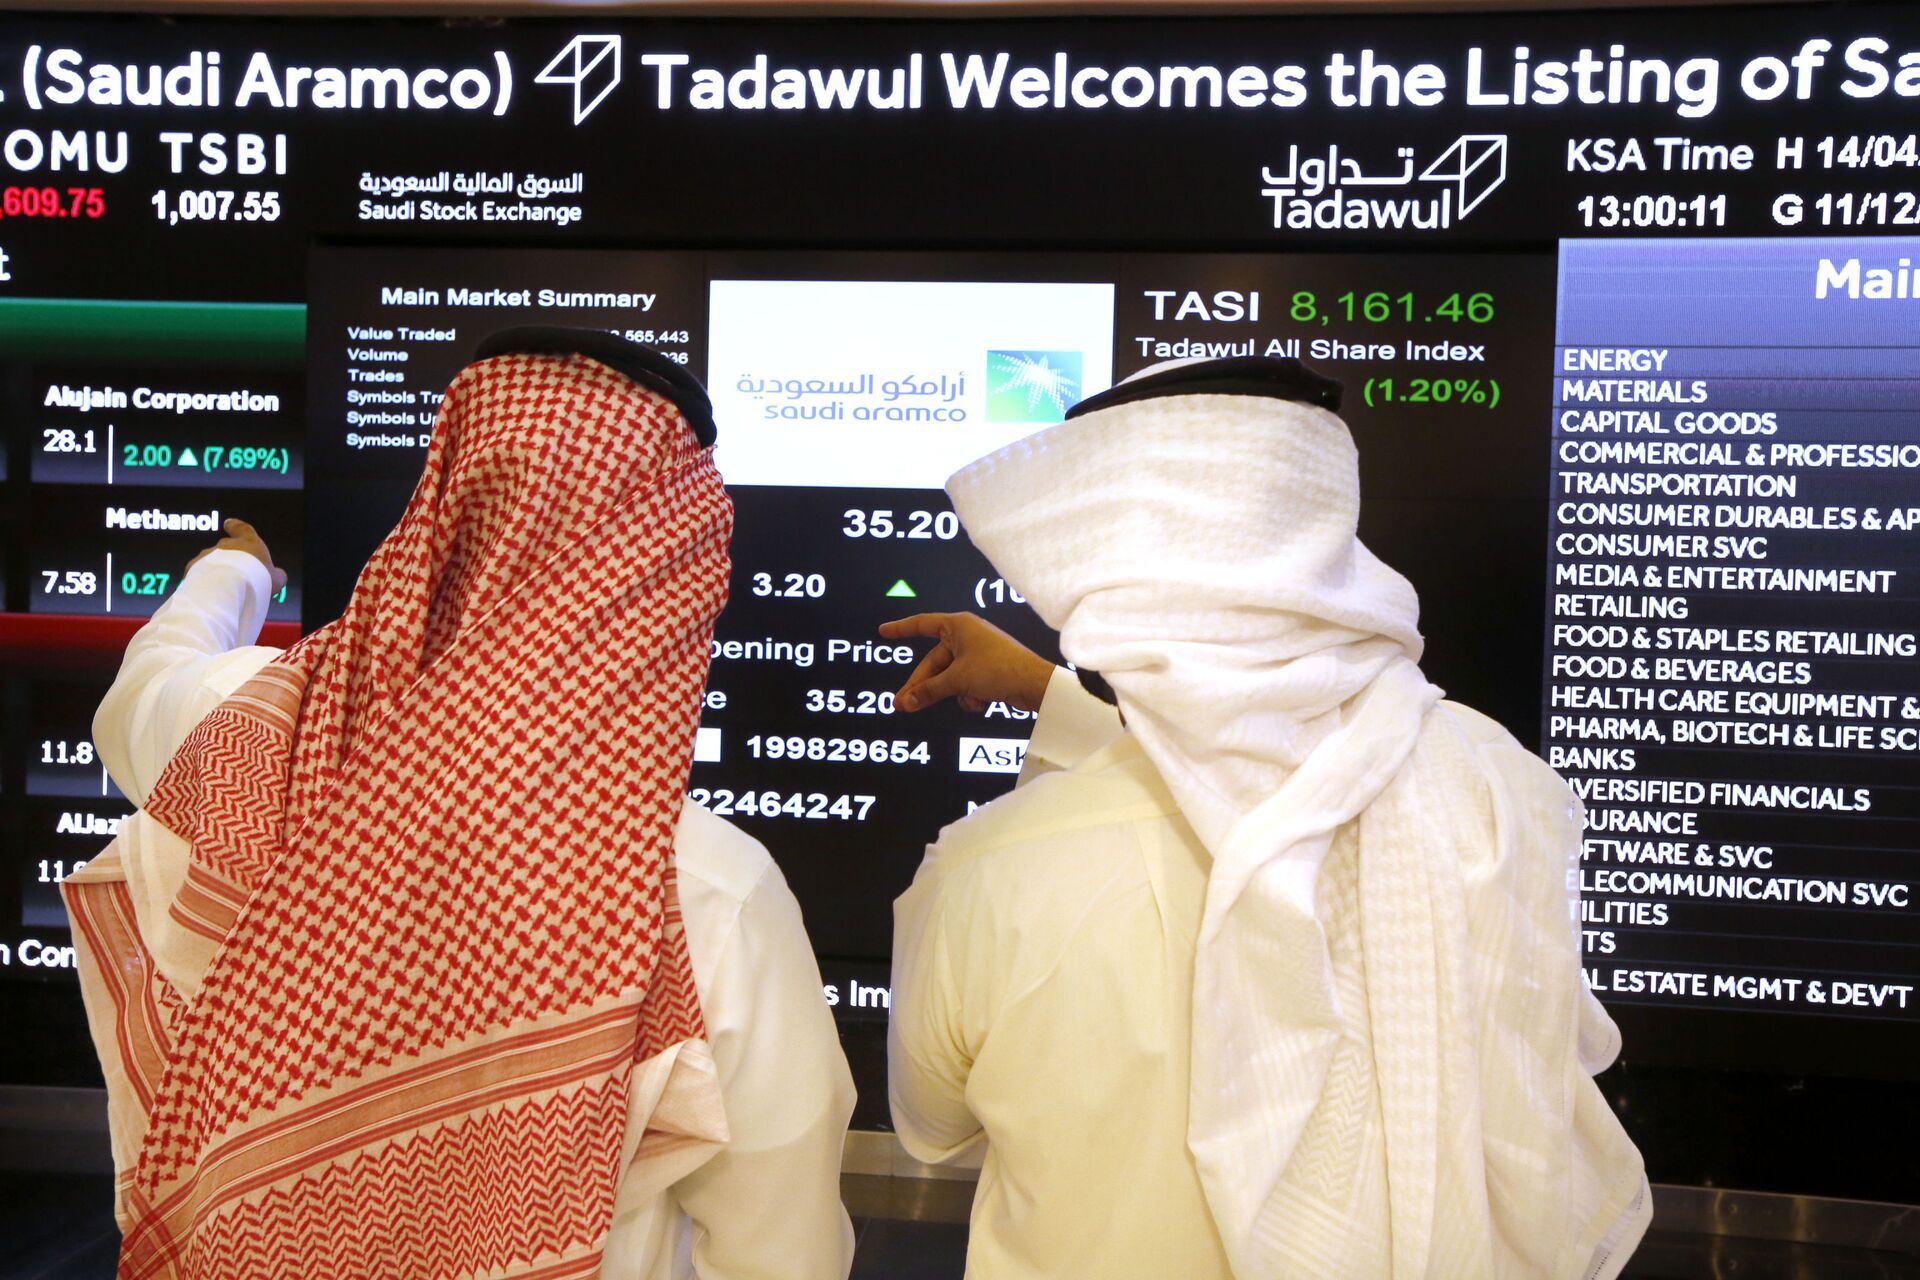 Saudi stock market officials watch the market screen displaying Saudi Arabia's state-owned oil company Aramco after the debut of Aramco's initial public offering (IPO) on the Riyadh's stock market in Riyadh, Saudi Arabia, Wednesday, Dec. 11, 2019 - Sputnik International, 1920, 07.09.2021